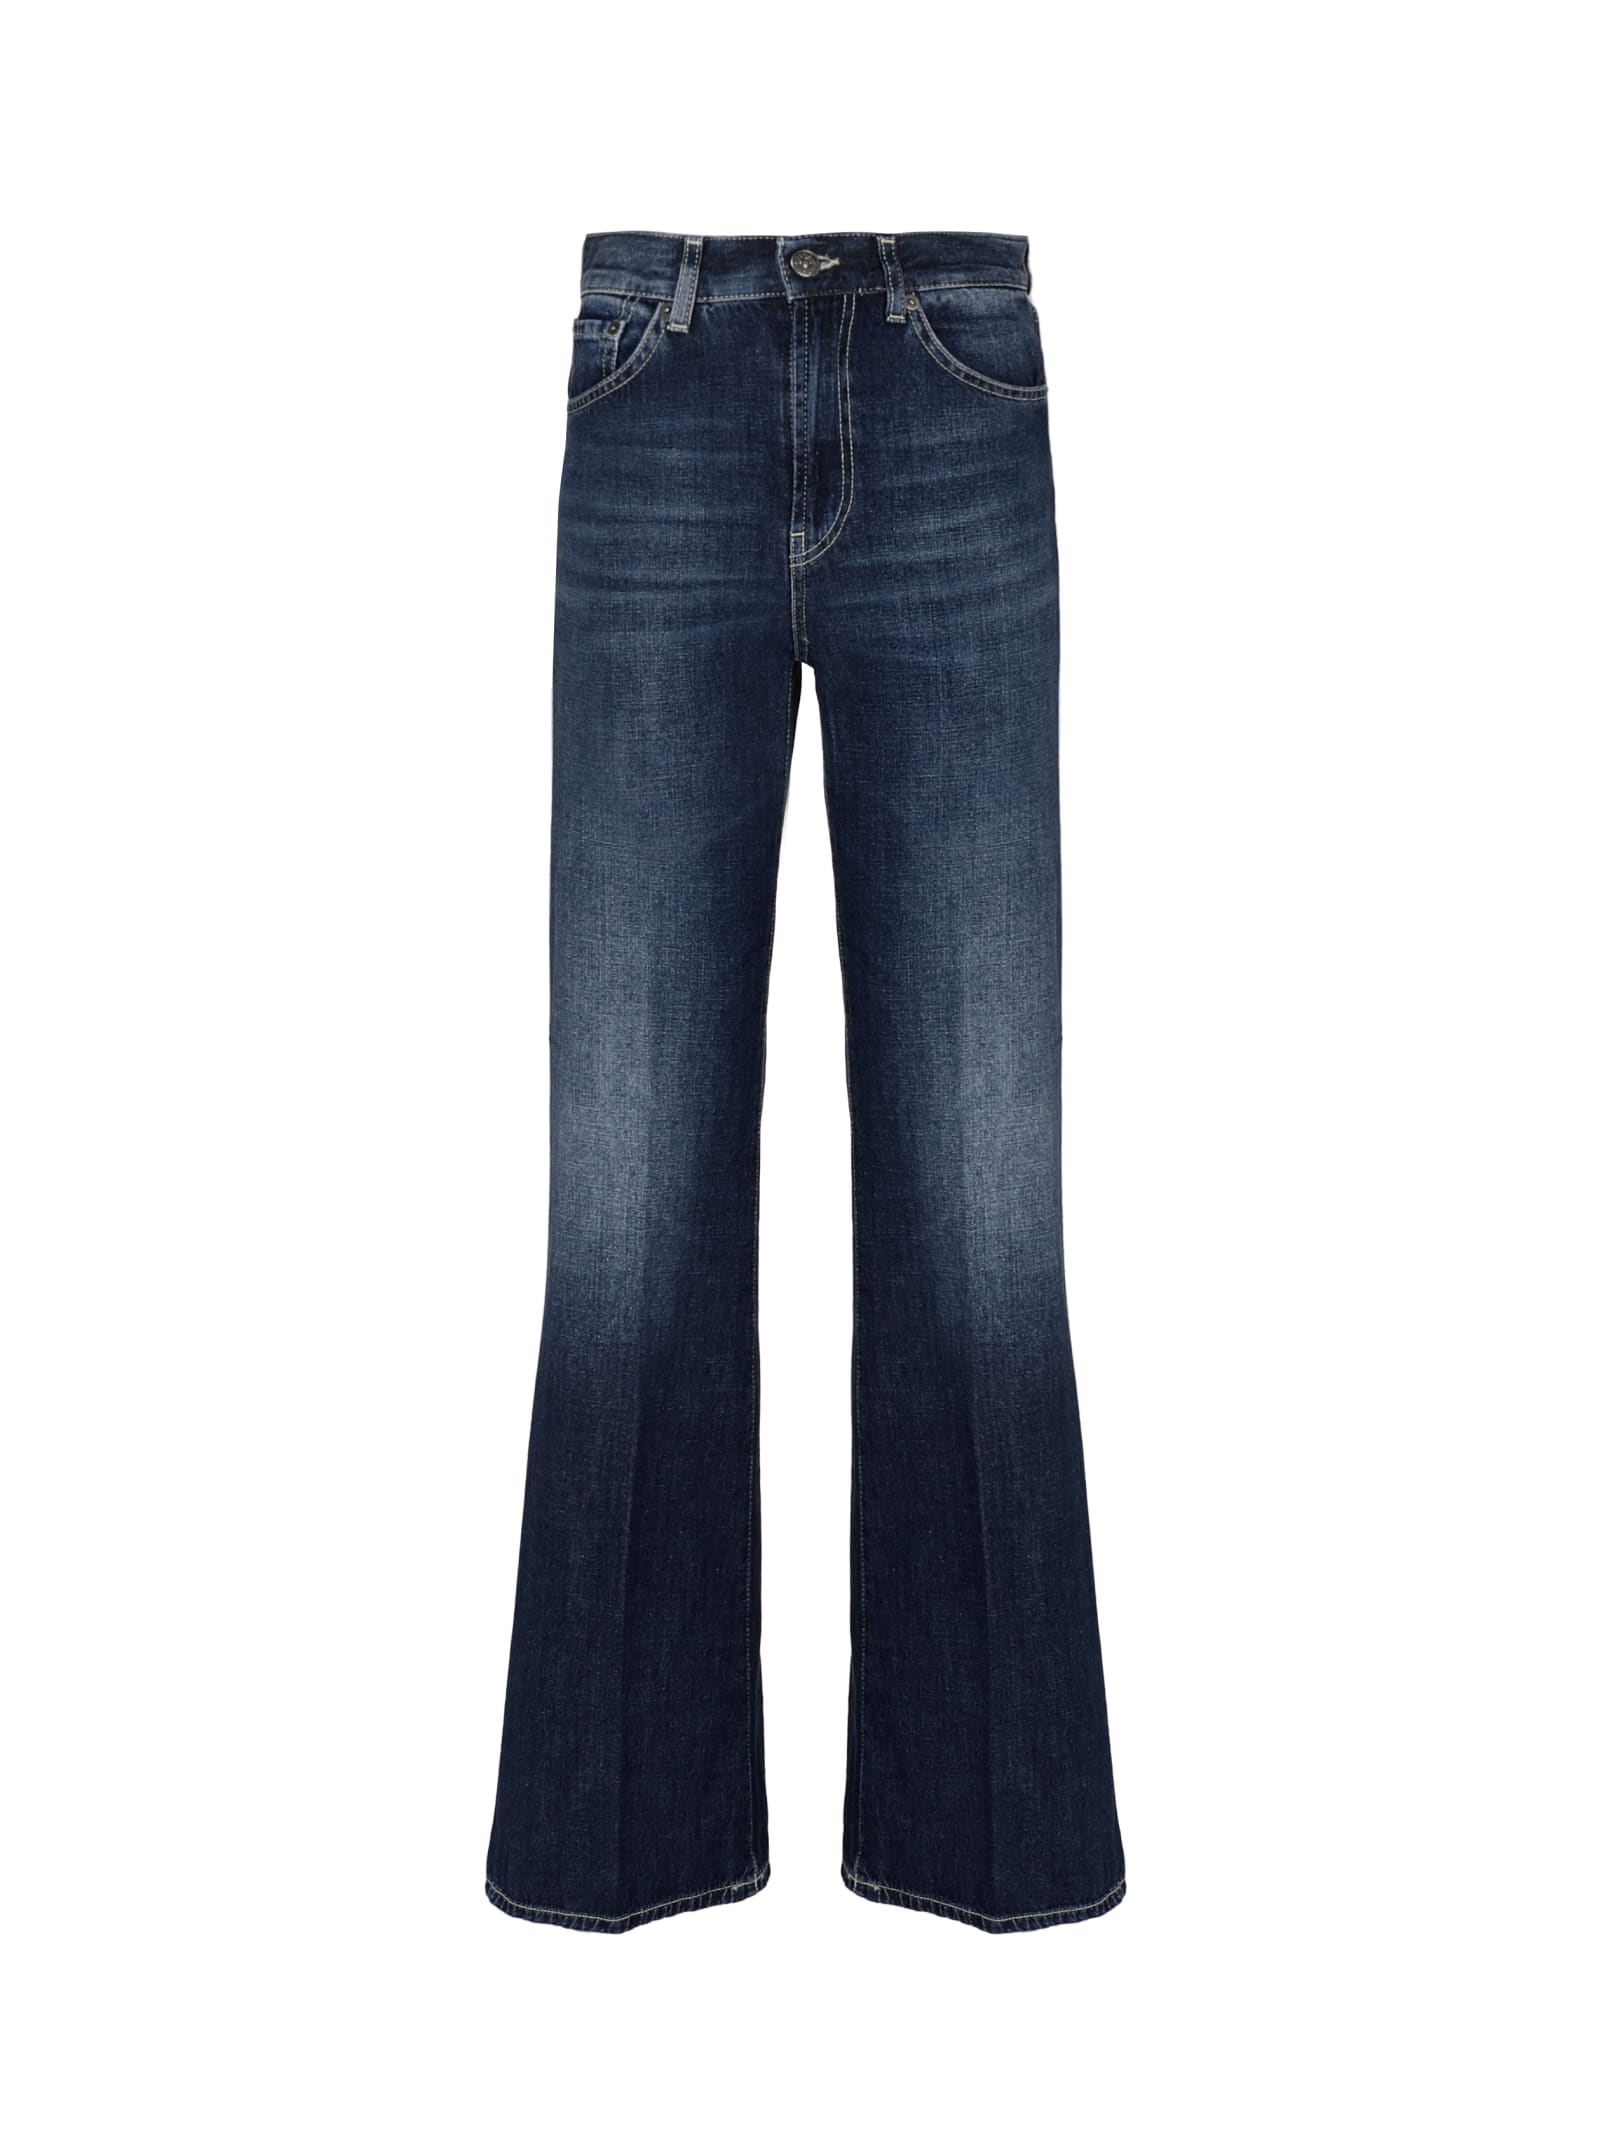 DONDUP FLARED JEANS IN COTTON